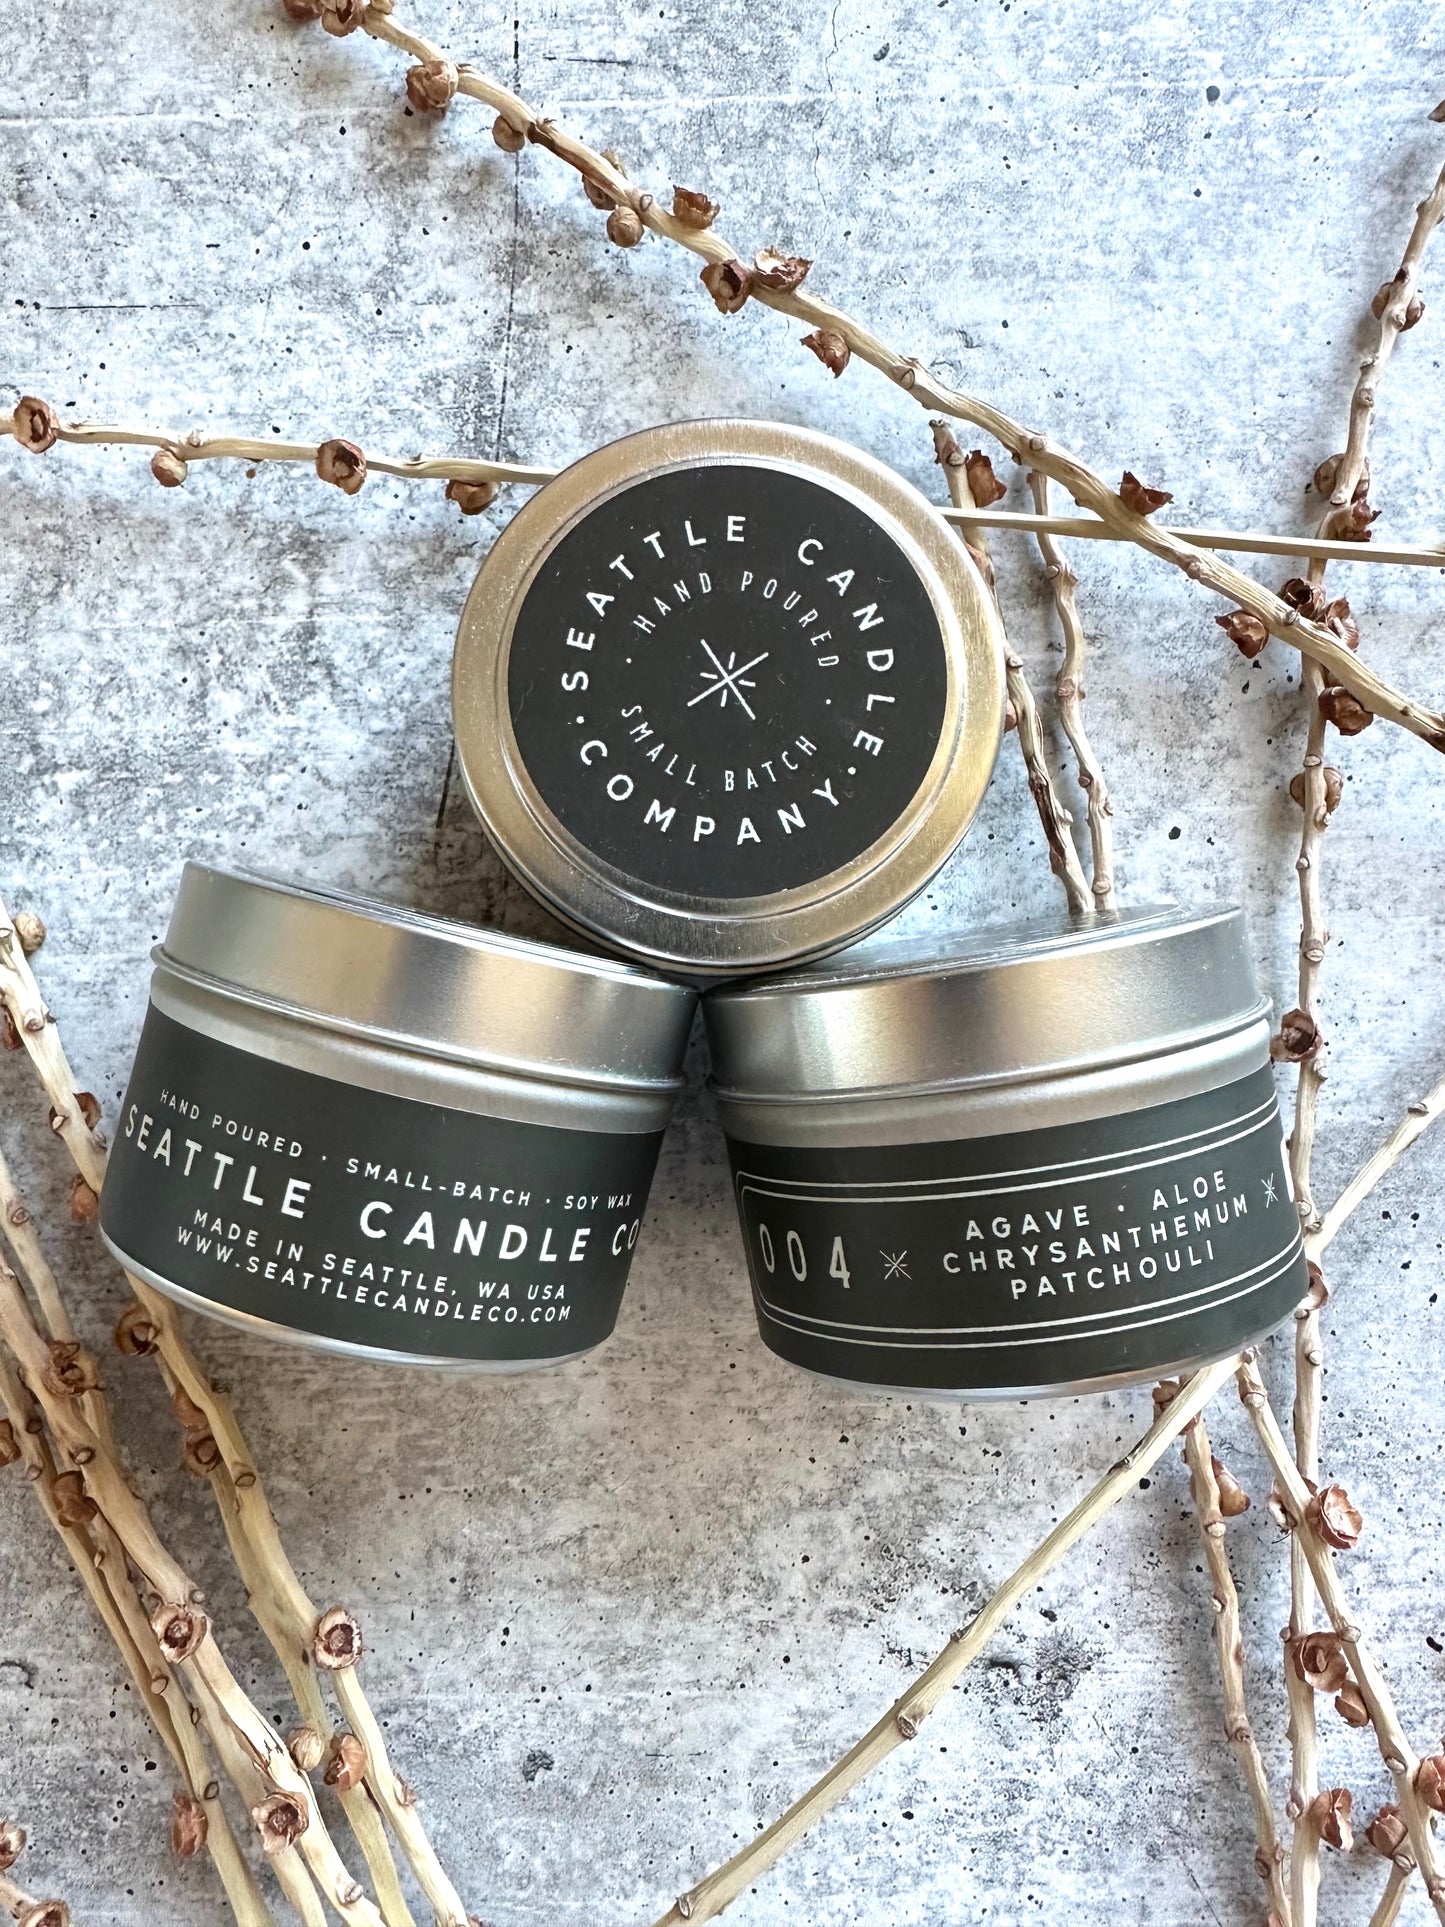 Seattle Candle Company